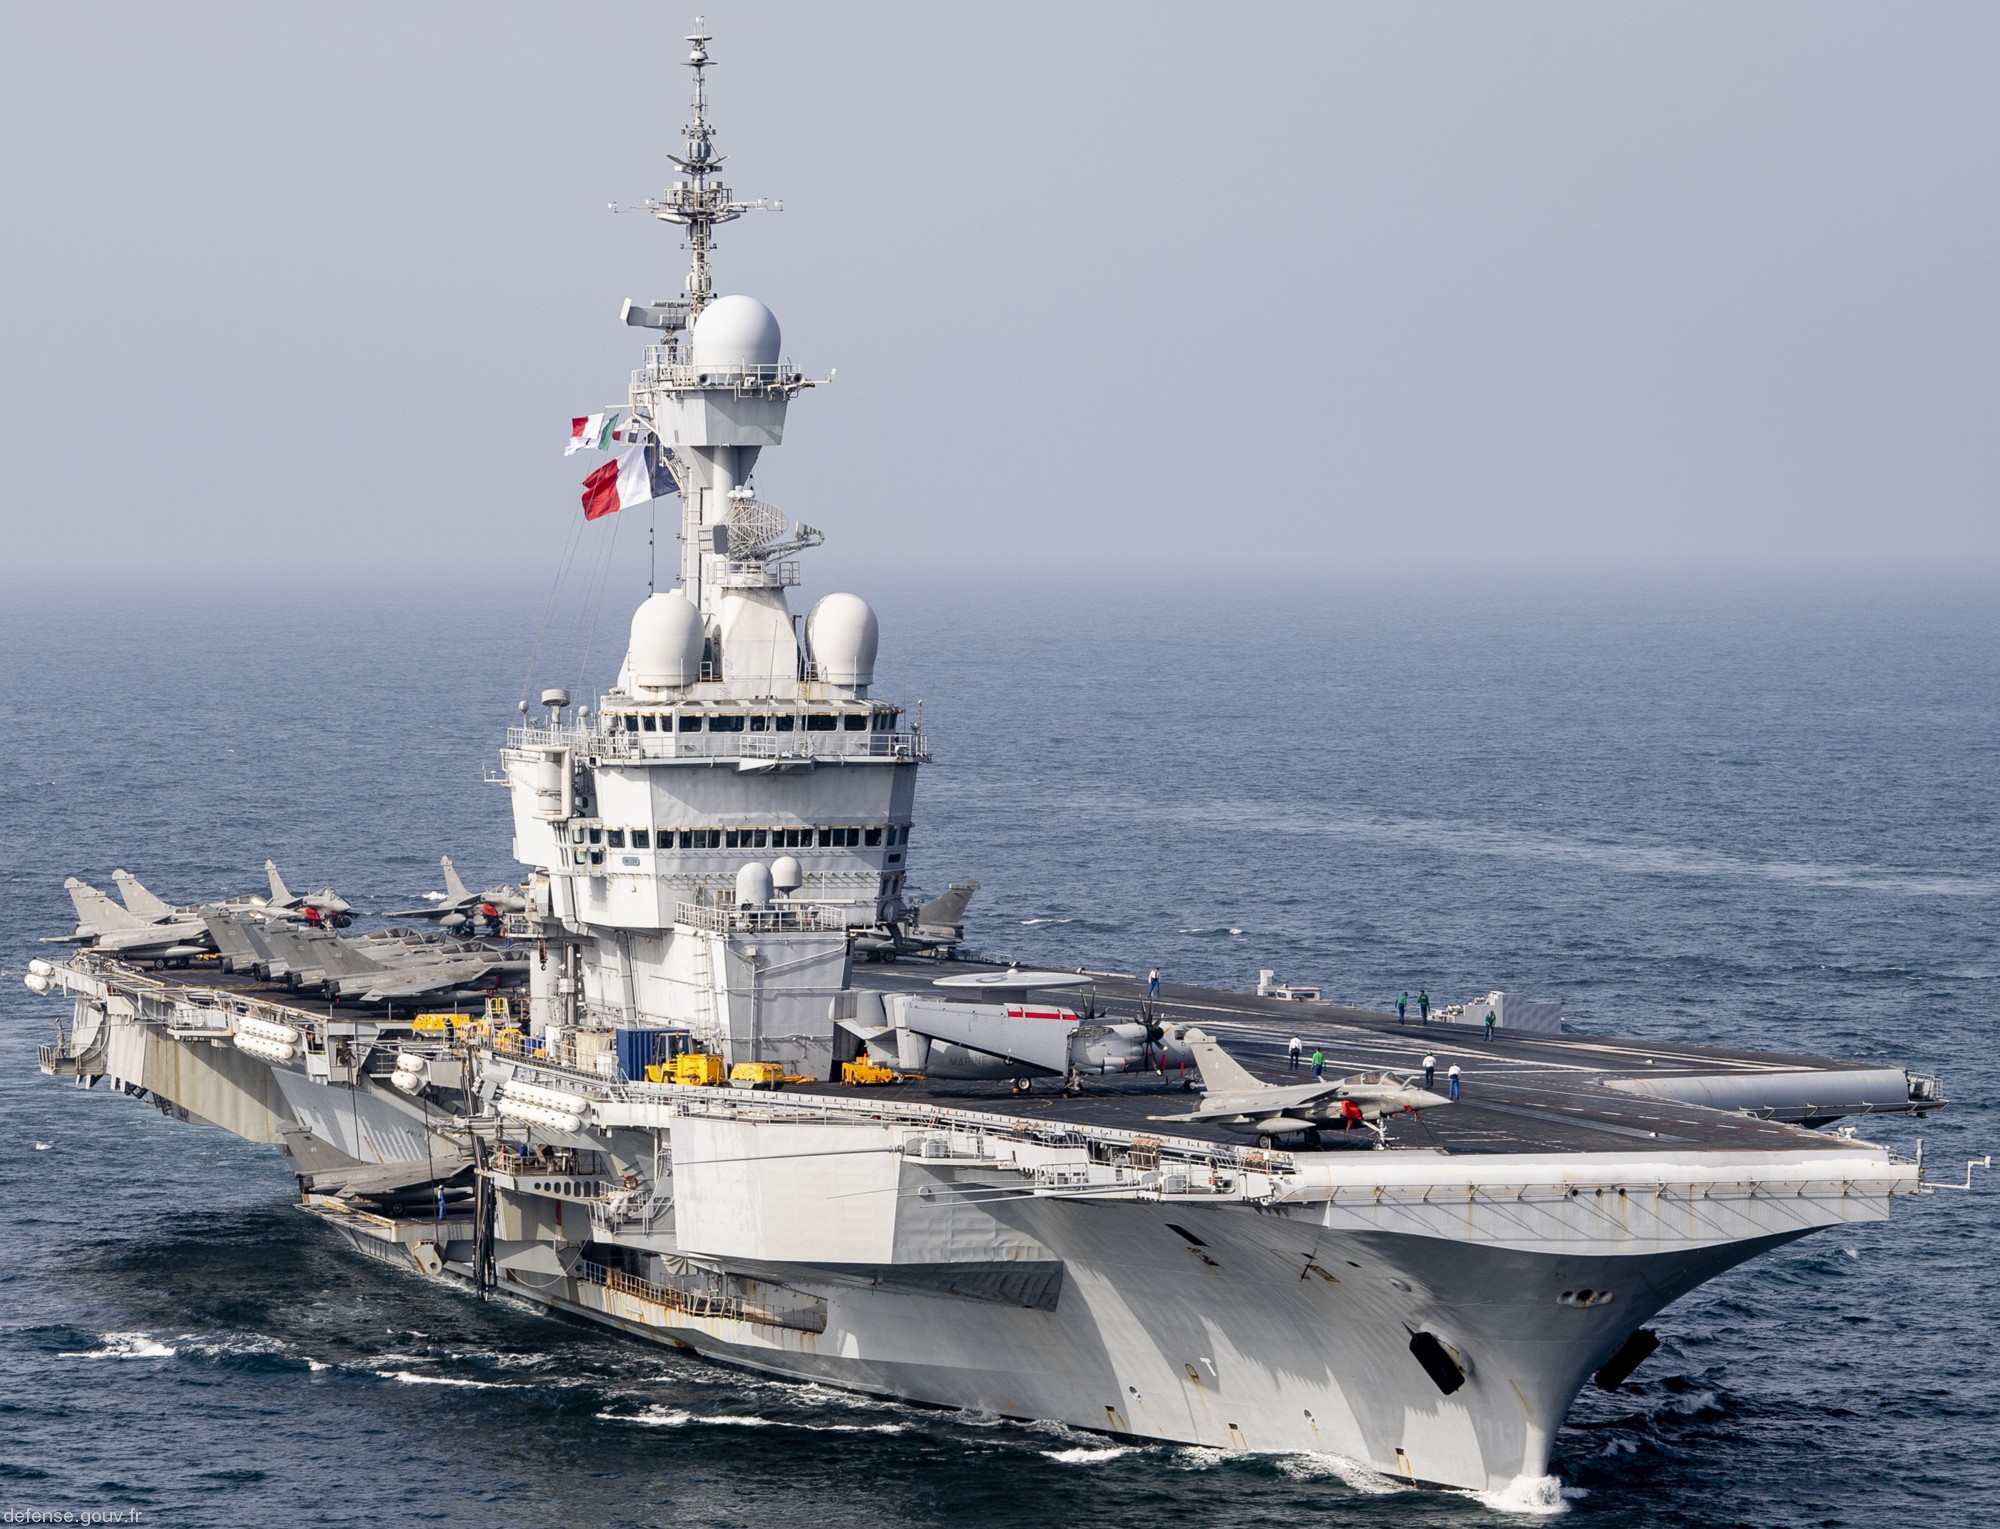 r-91 fs charles de gaulle aircraft carrier french navy porte avions 89